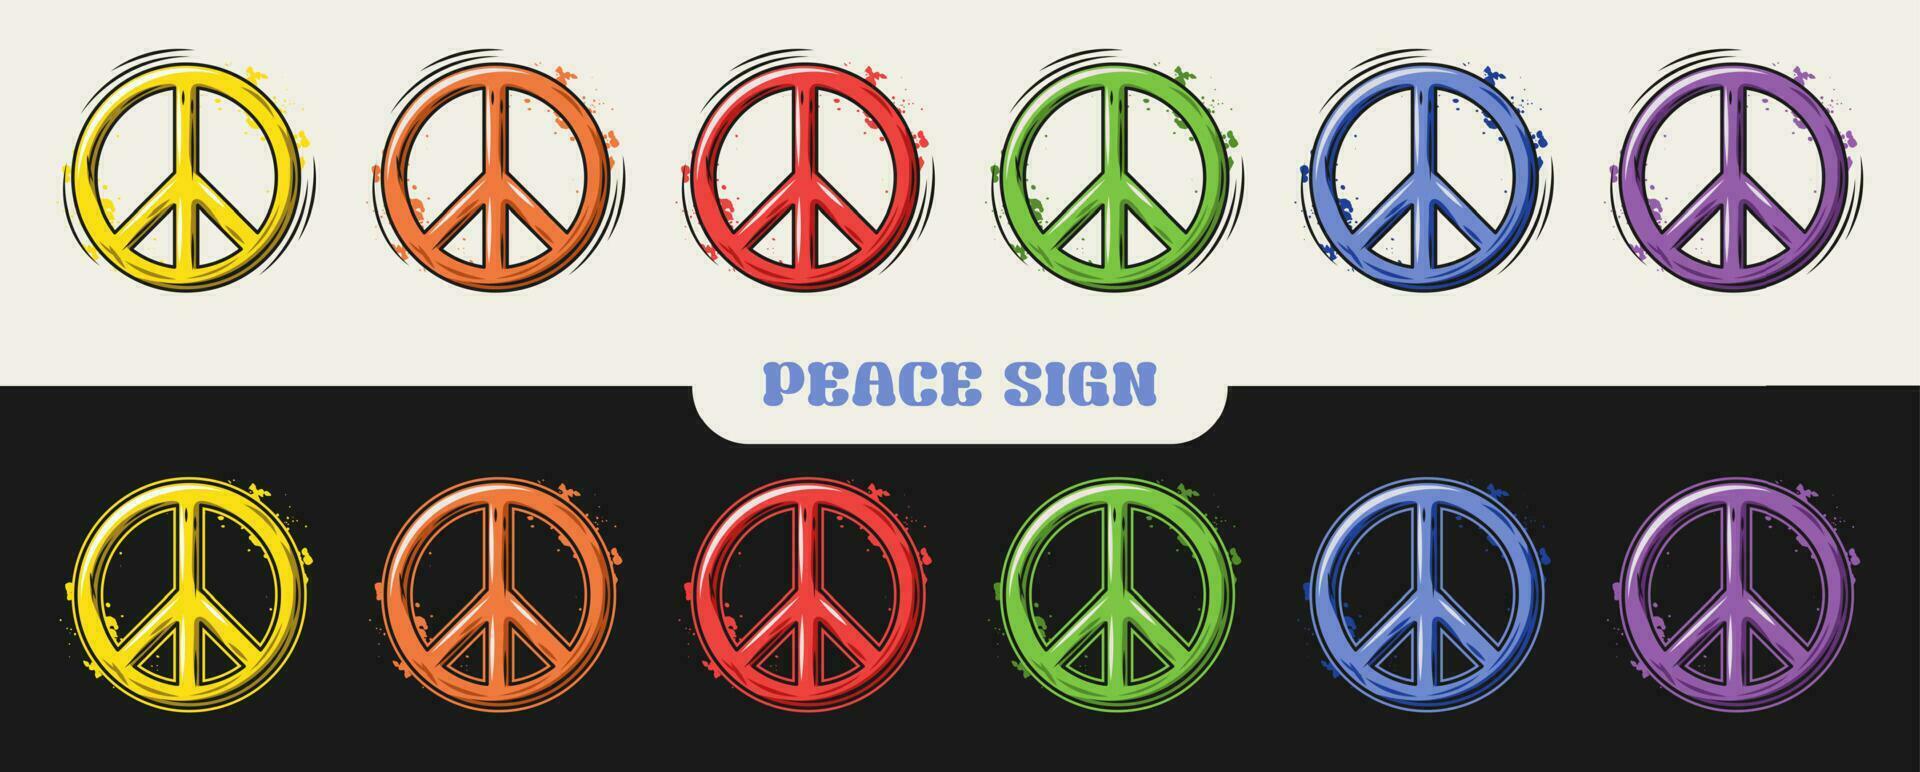 Peace sign with paint splashes. Set of symbols in rainbow colors in retro style. Illustrations on black, white background. Good for groovy, hippie style vector